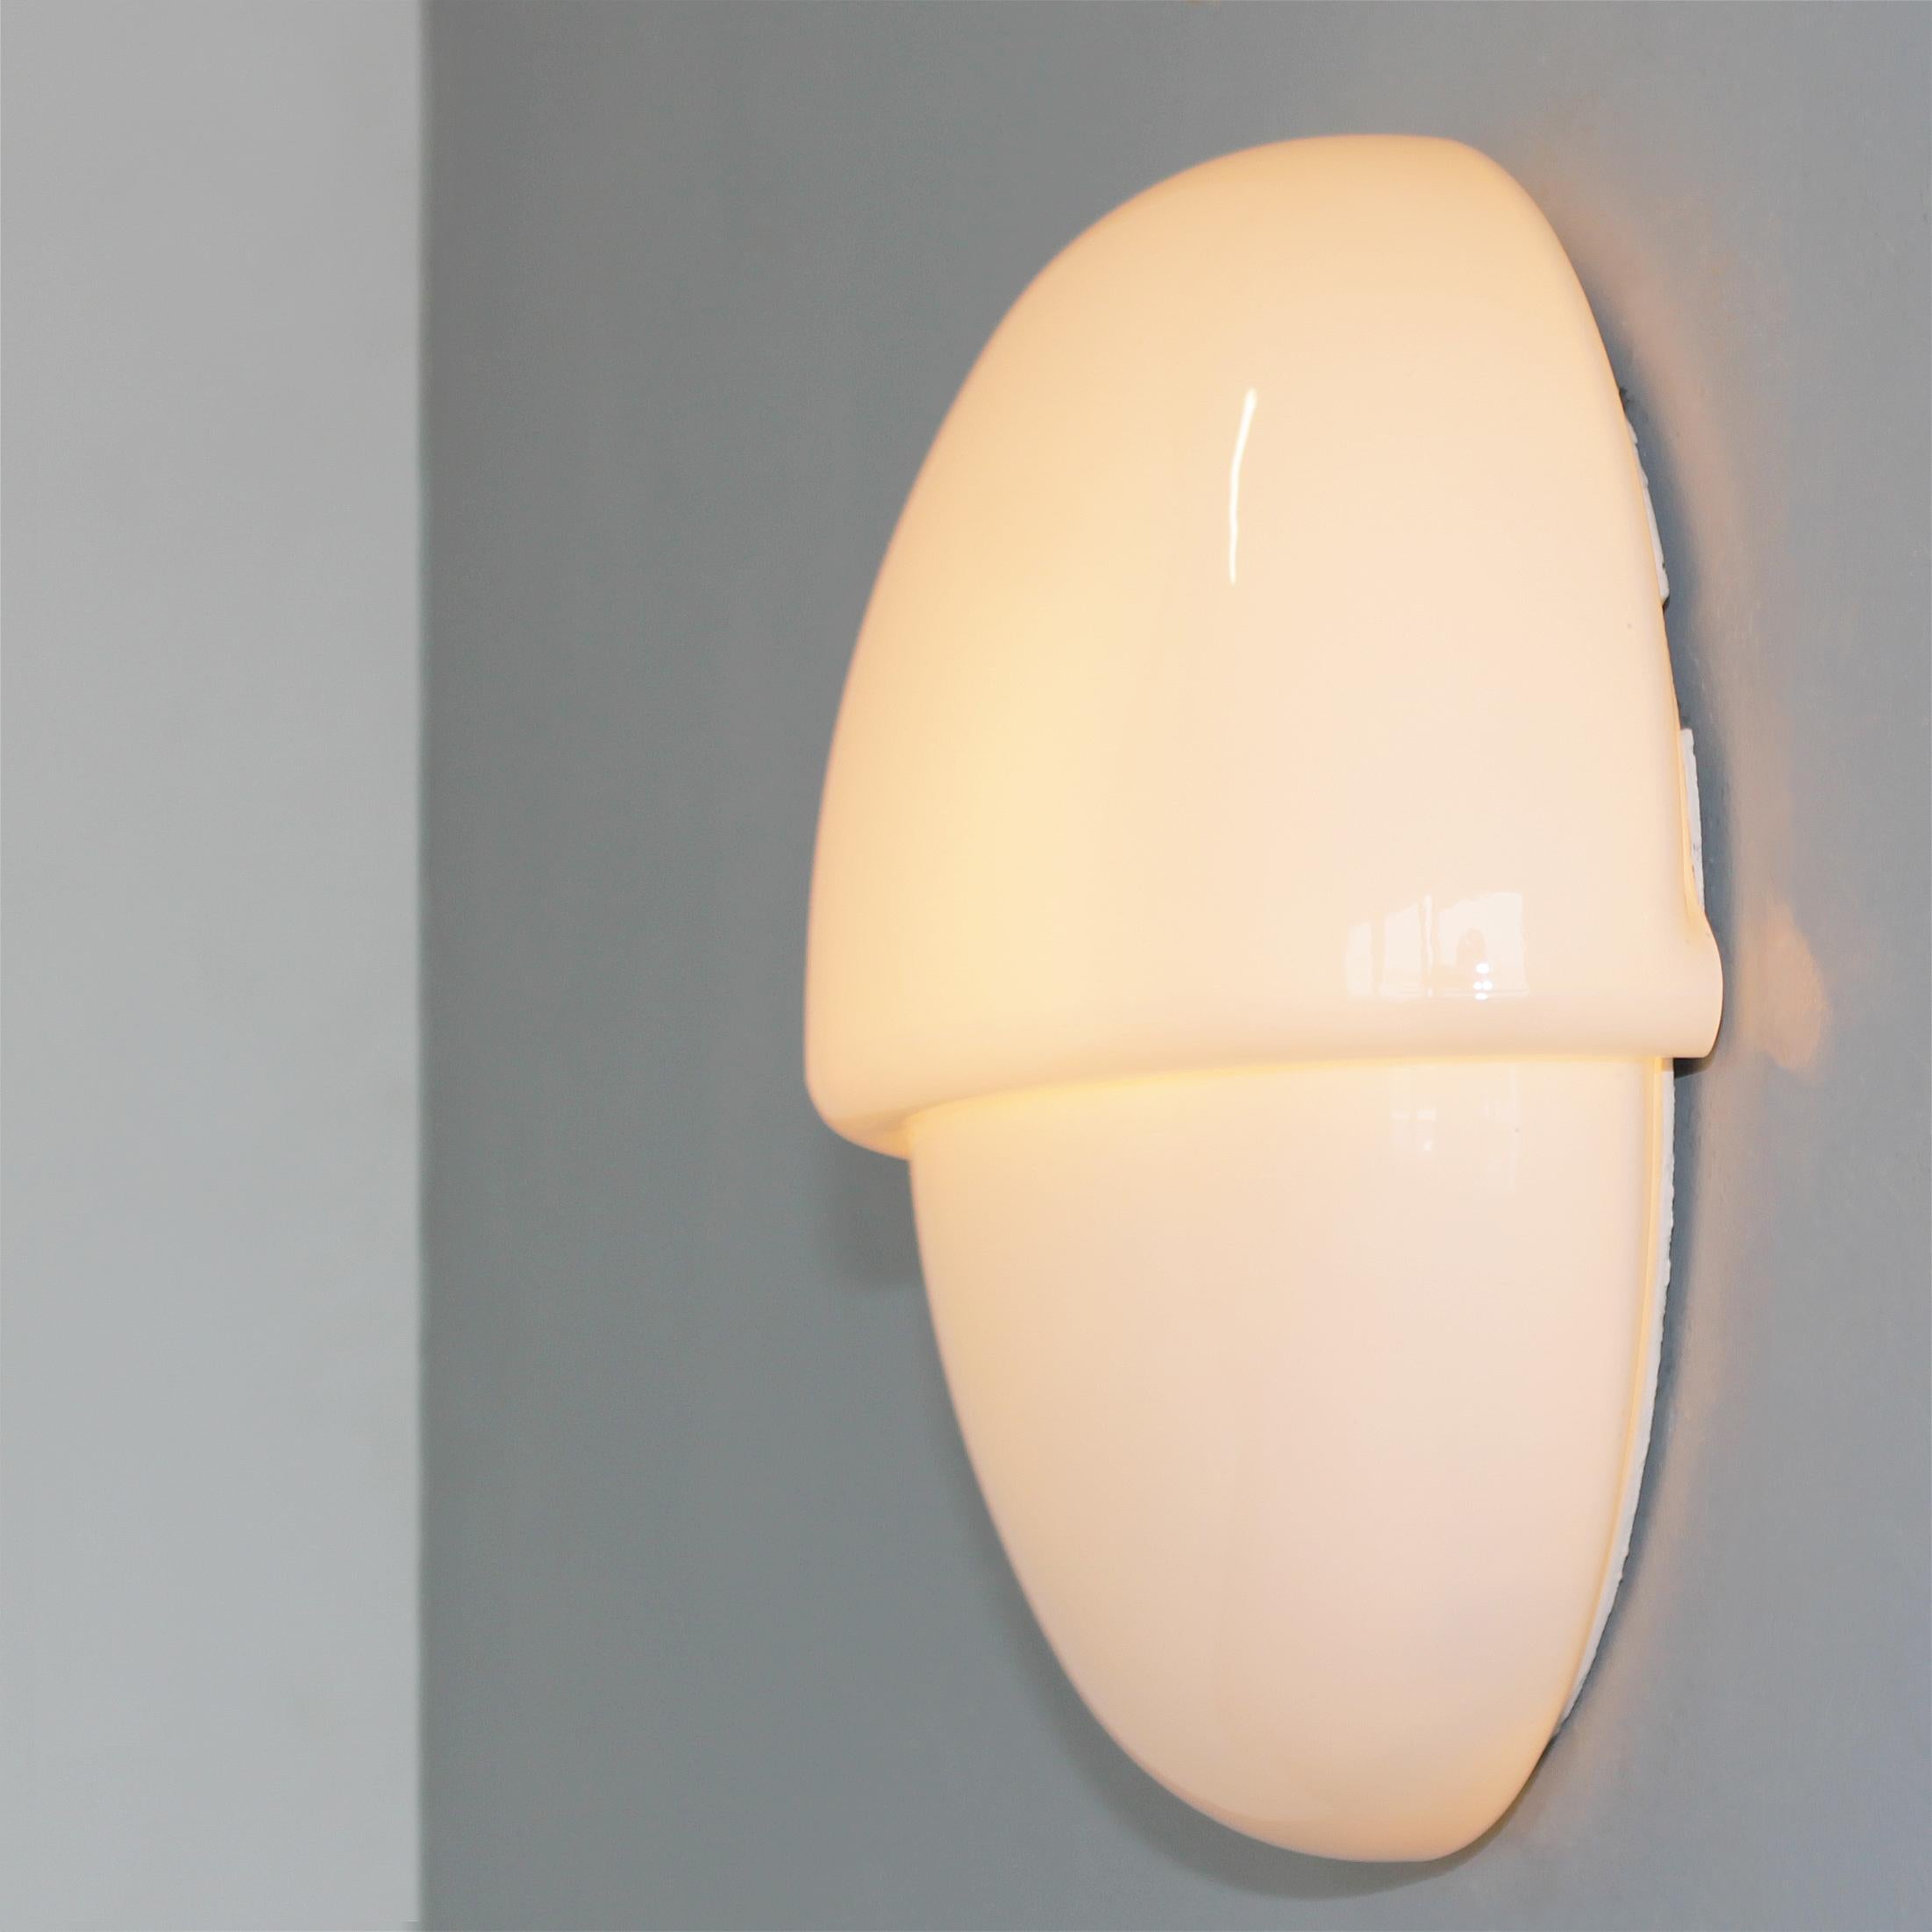 Opaline Glass Wall Light 'Grande Mania' by Vico Magistretti for Artimide Italy